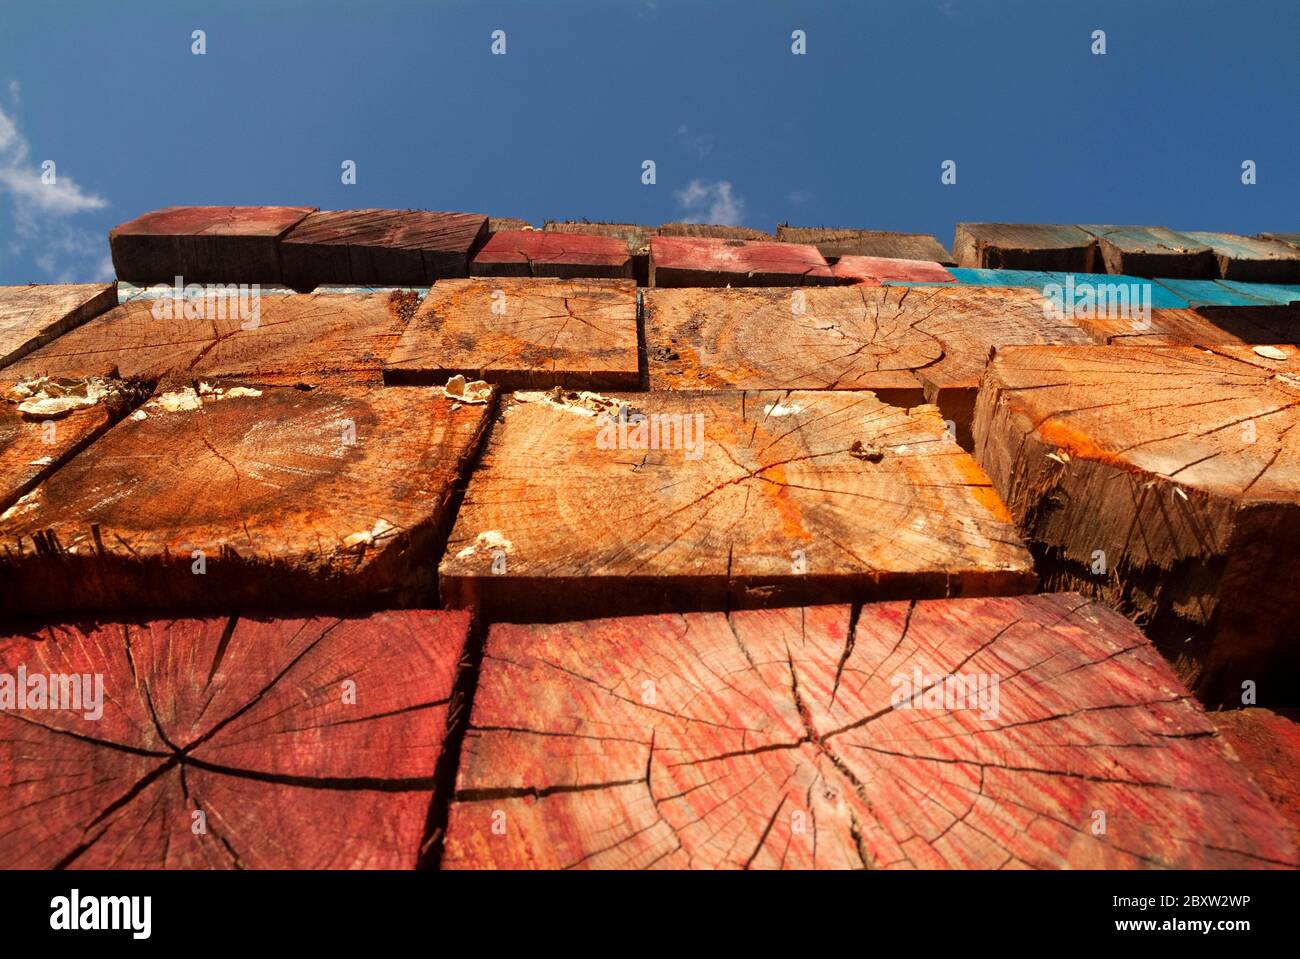 TIMBER: Multicolored wooden logs are stacked into a wall in the parking lot of a shopping mall. Stock Photo